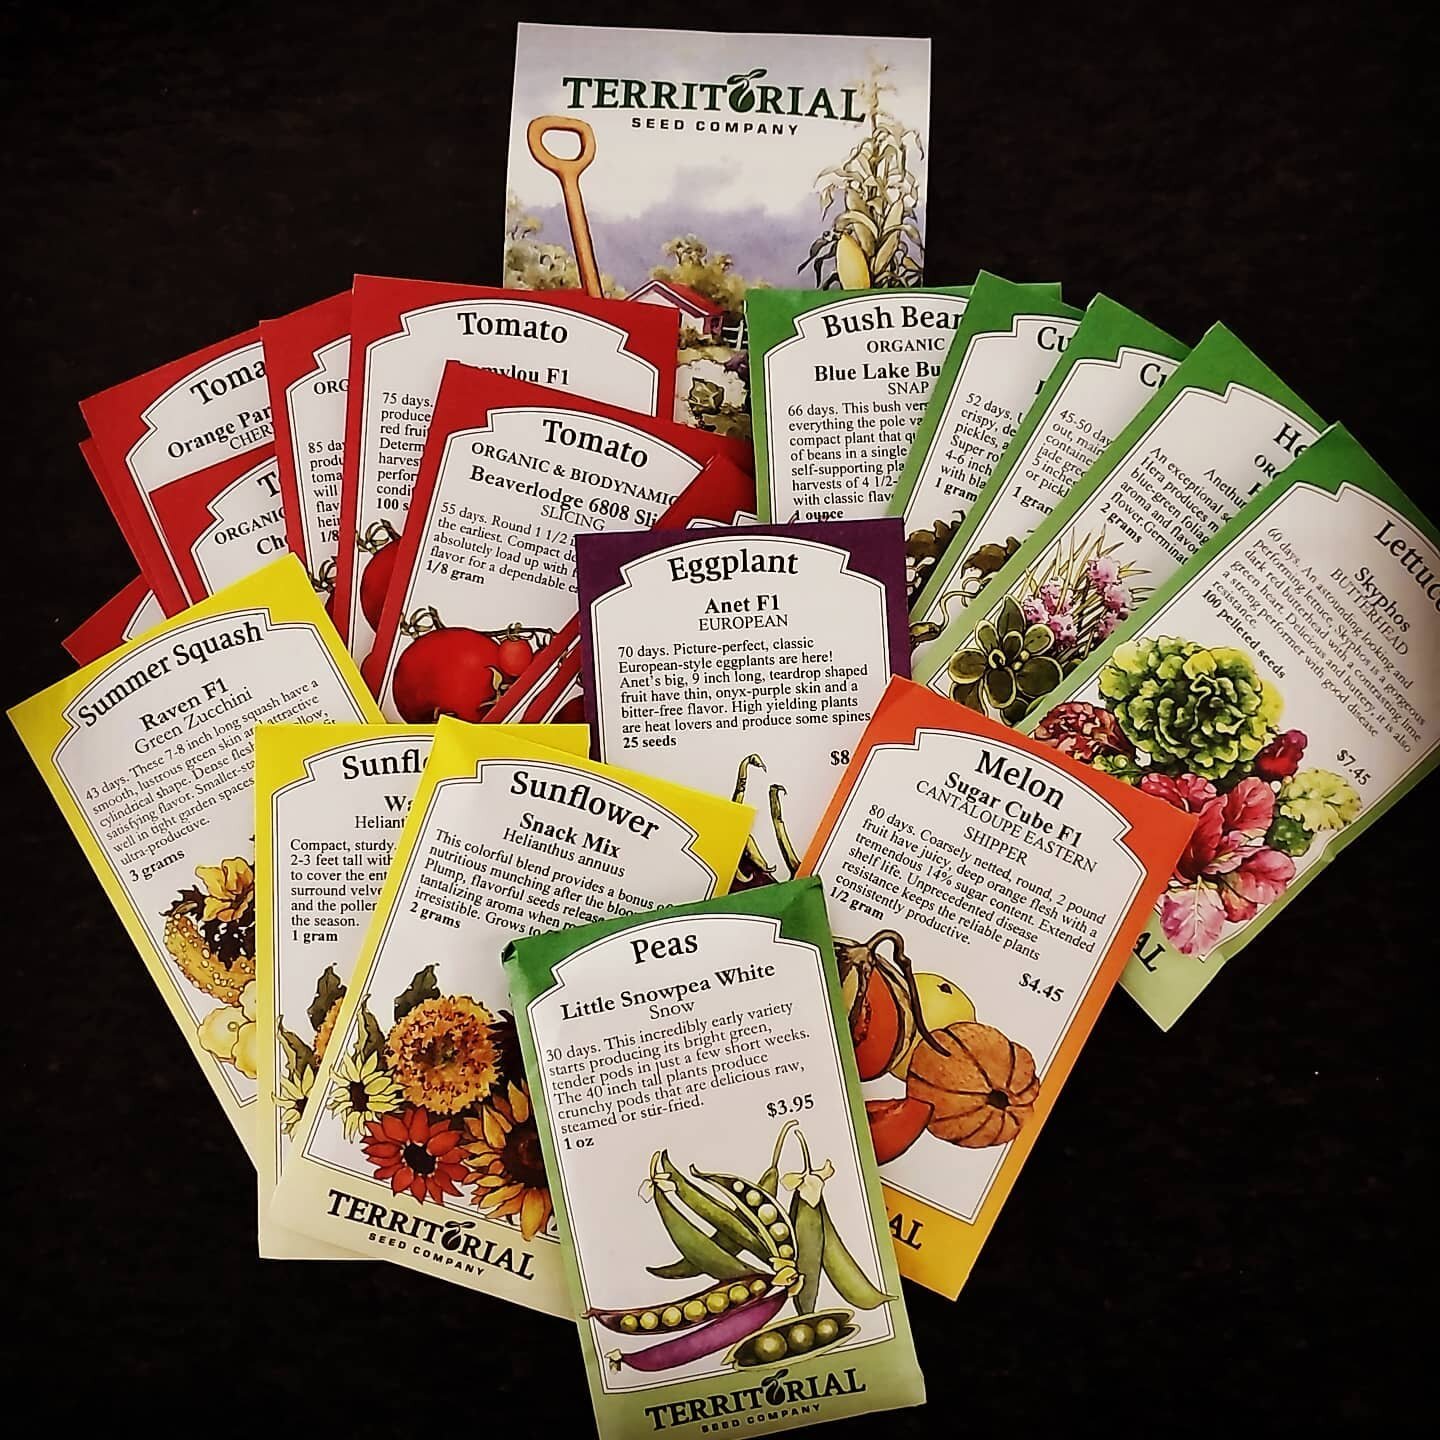 FINALLY! This is the best kind of mail to get. Starting many of these this weekend. Thanks @territorialseedcompany! 
.
.
.
#seeds #seedstarting #seedlings #cantwaitforspring #gardening #urbangardening #vegetables #herbs #flowers #growyourown #grow4li